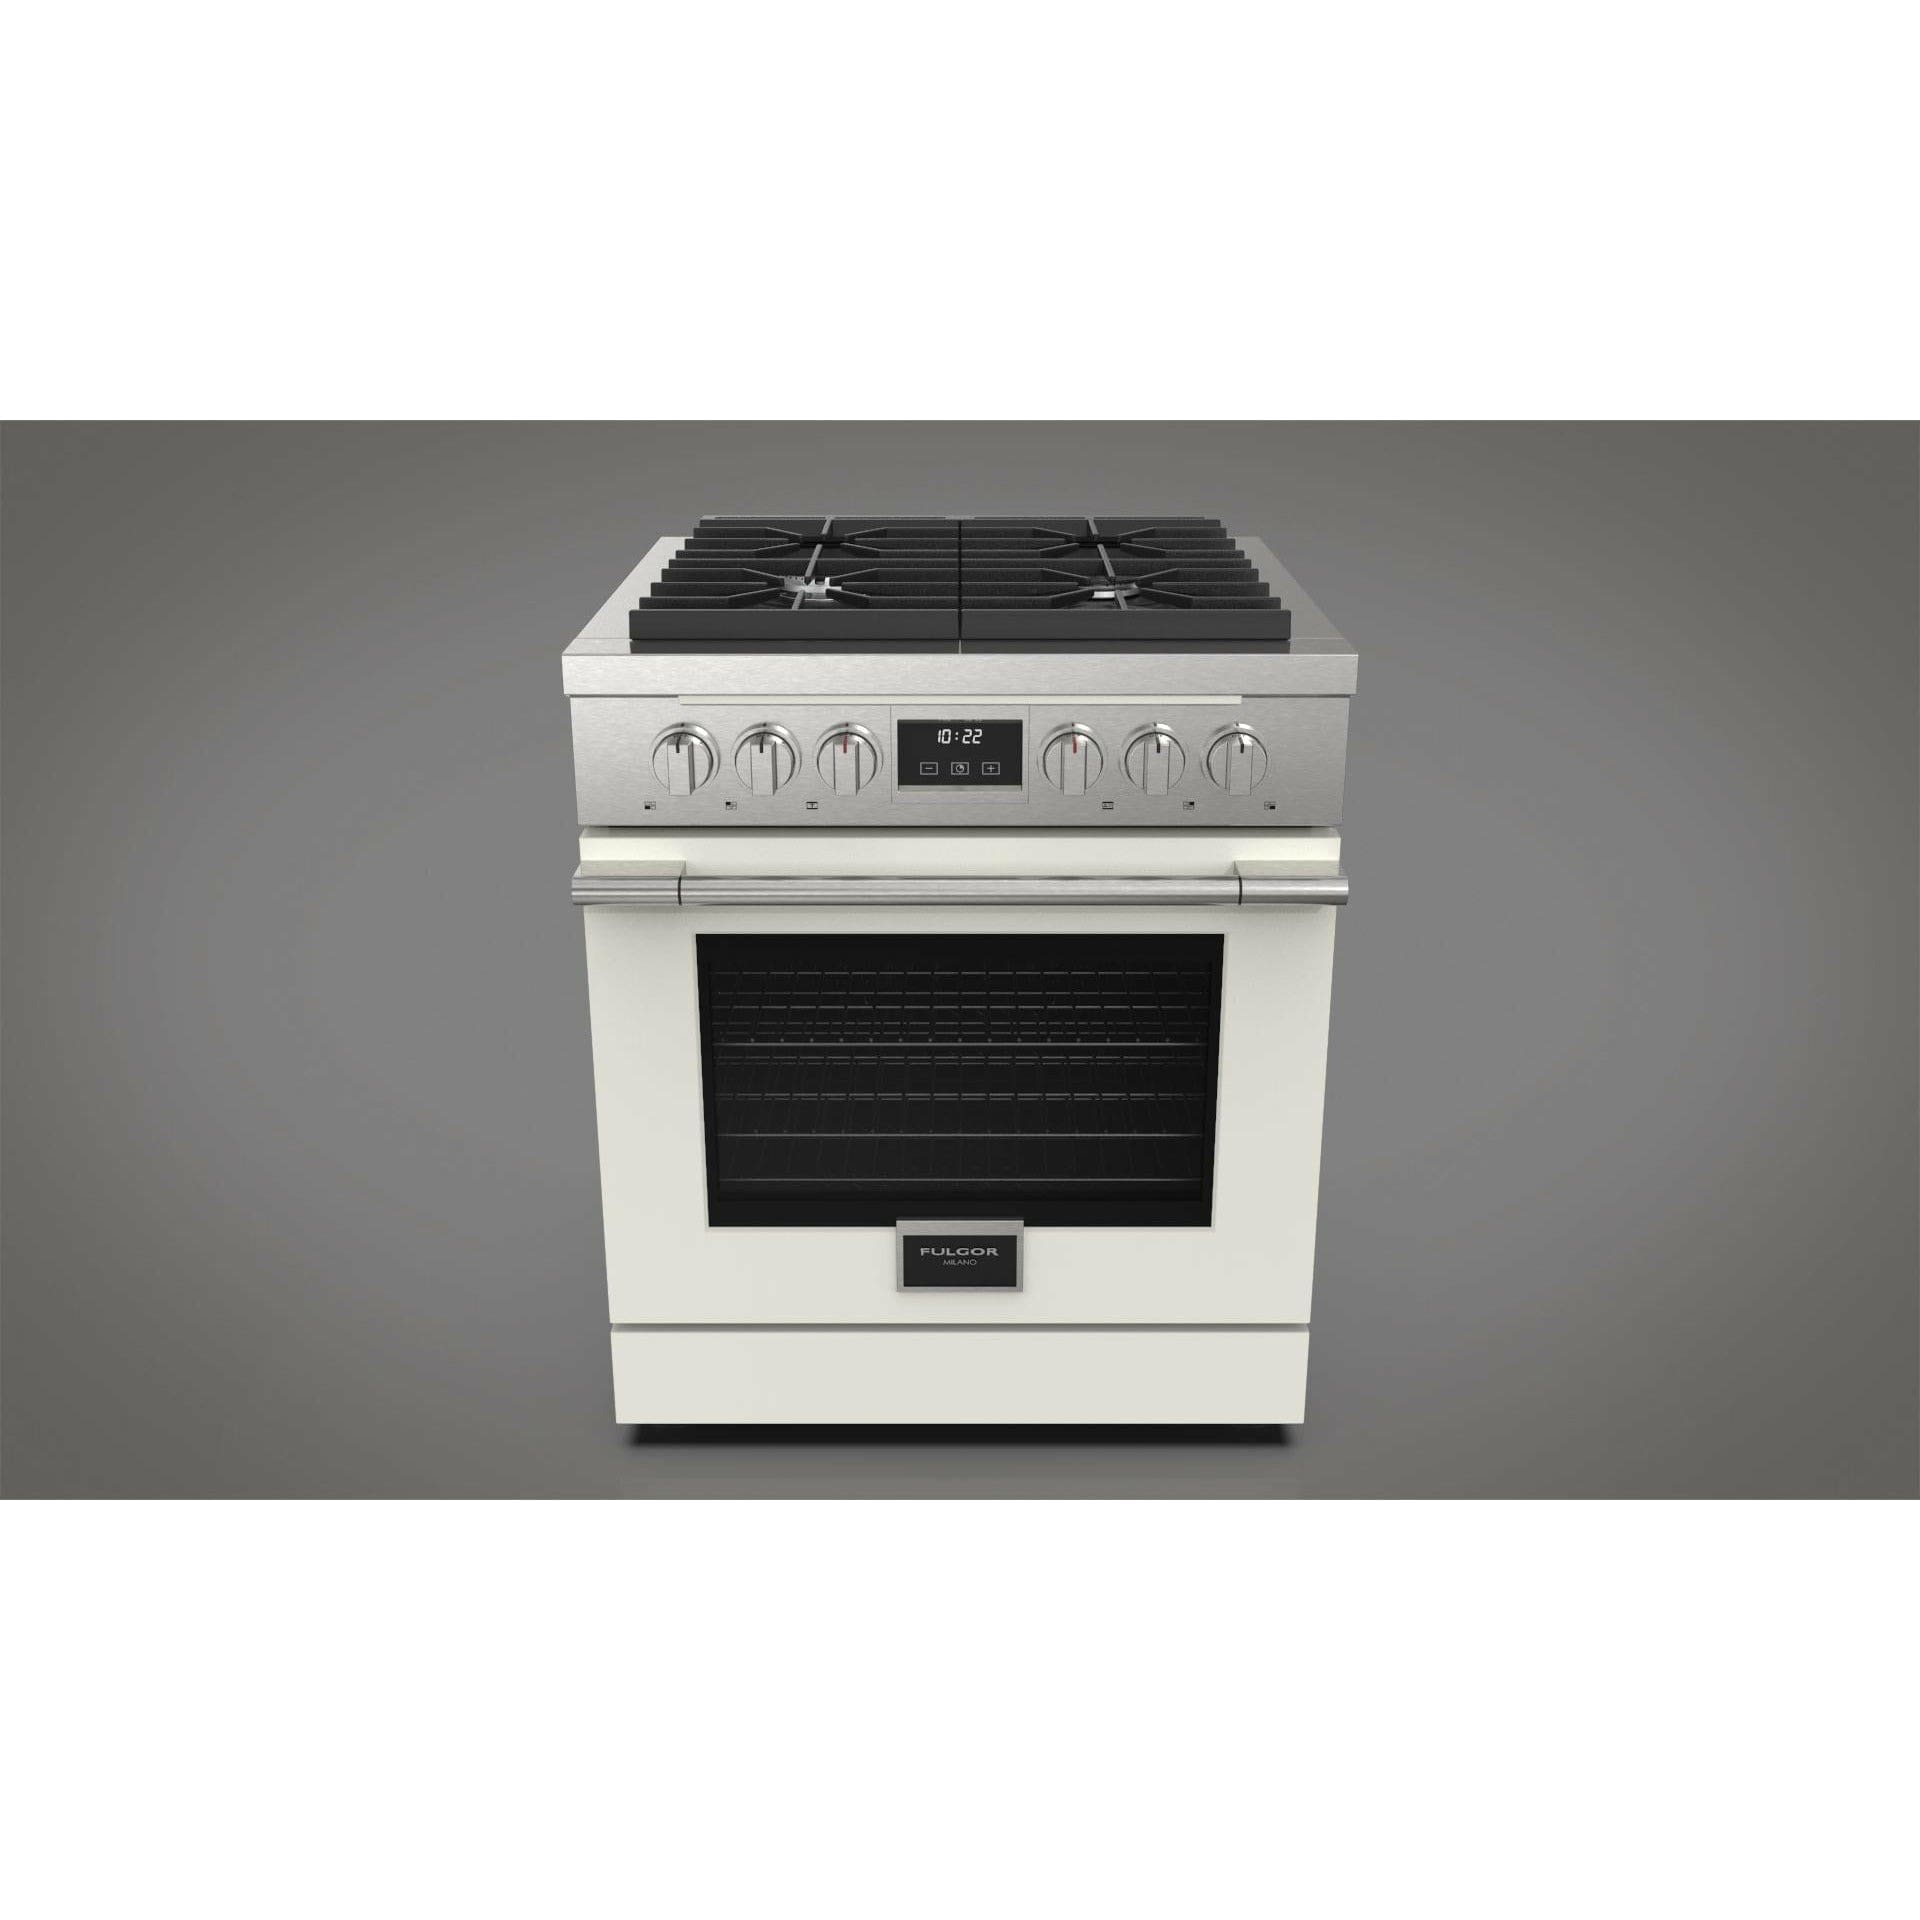 Fulgor Milano 30" Freestanding All Gas Range with 2 Duel Flame Burners, Stainless Steel - F4PGR304S2 Ranges ACDKIT30MW Luxury Appliances Direct